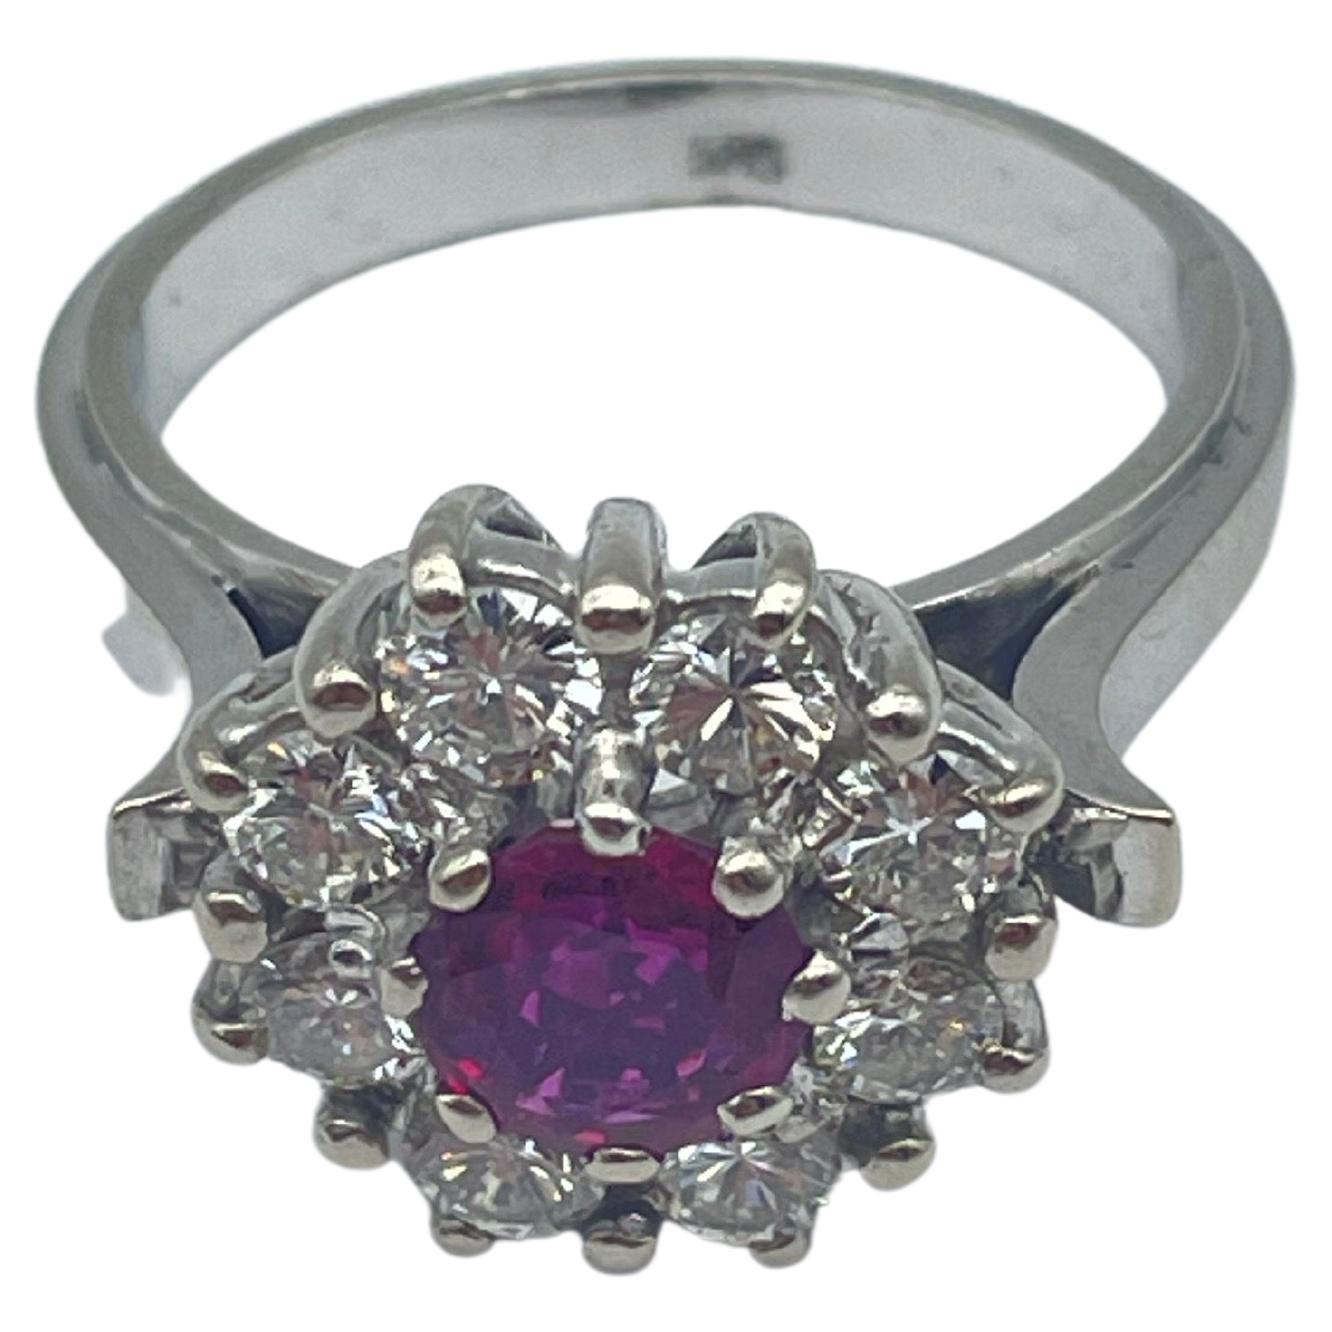 Aesthetic Movement Exquisite White Gold Ring: A Radiant Rubellite Gemstone Embraced by Brilliant For Sale